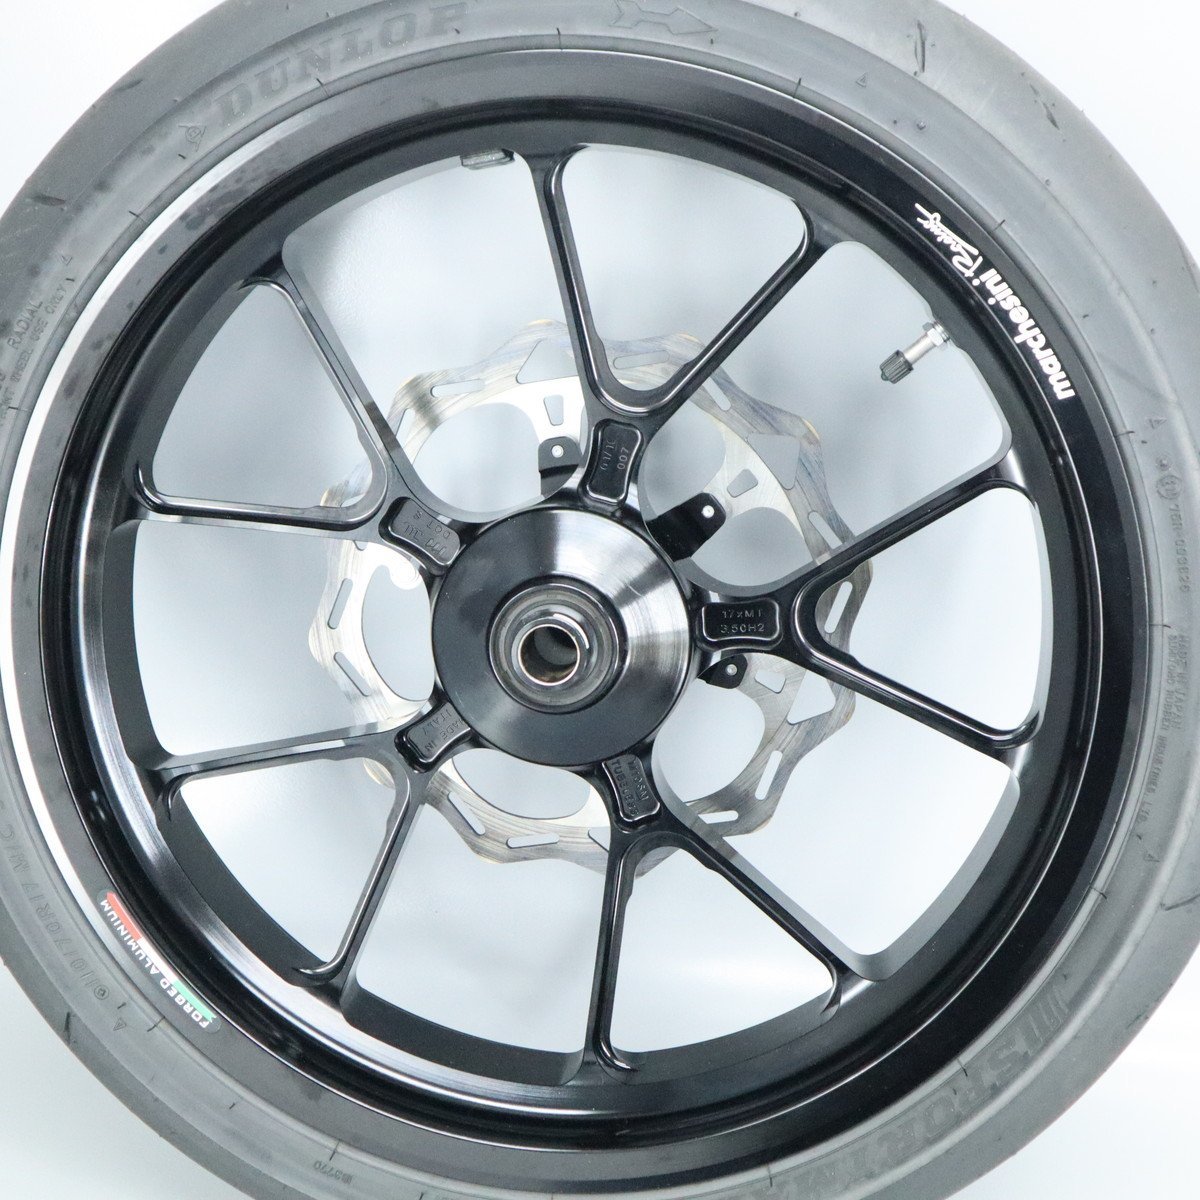 [2 mouth shipping ] KTM 250EXC motard Marchesini M10S Motard Supermoto wheel rom and rear (before and after) ( front 3.50-17 rear 4.50-17) 231204BD0110